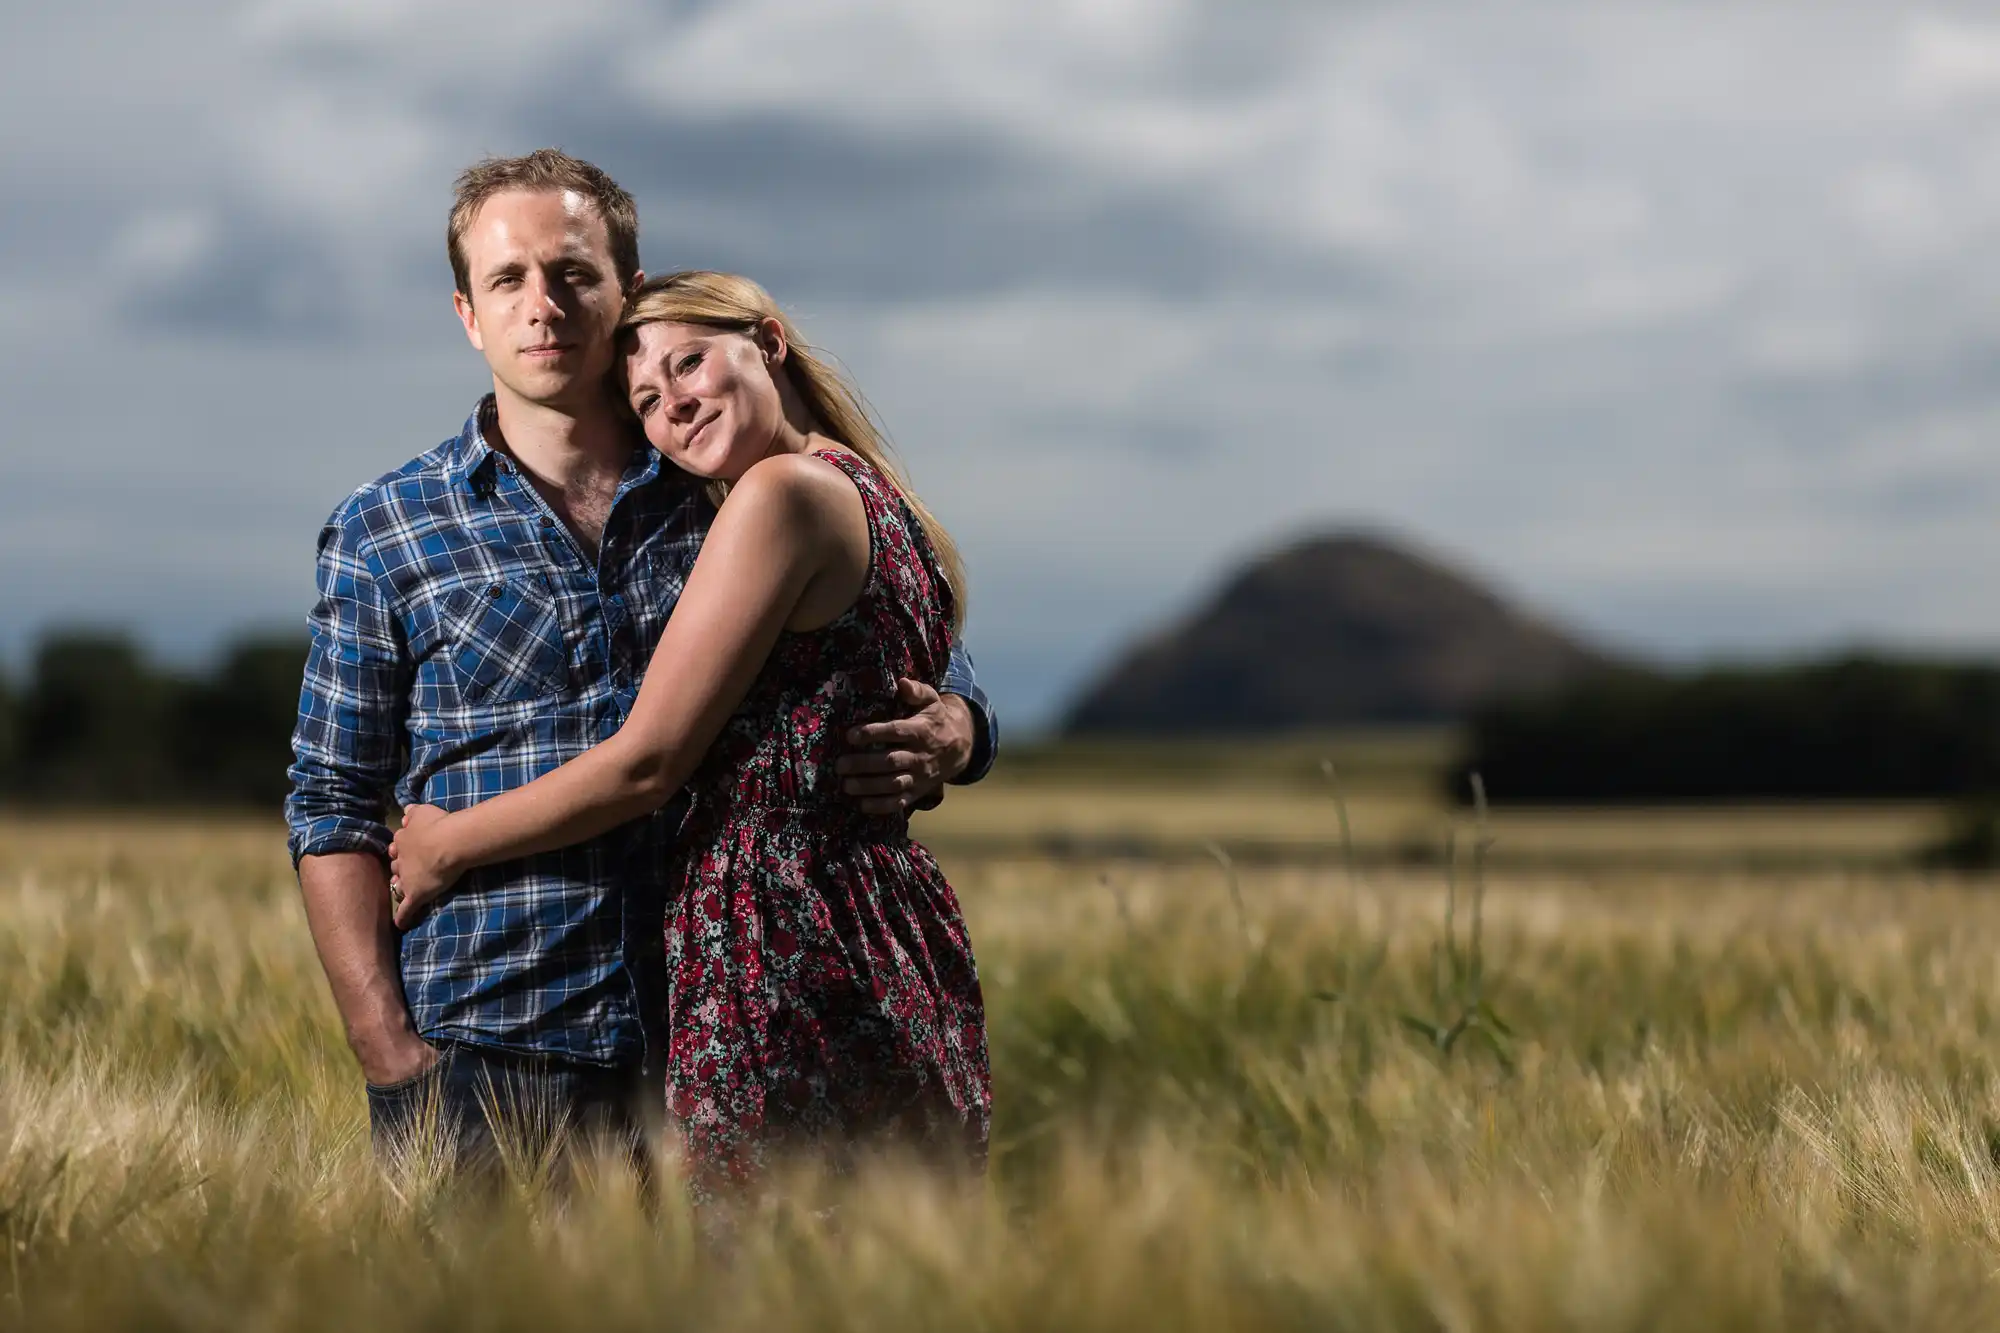 A couple embracing in a field with a cloudy sky above and a hill in the background.